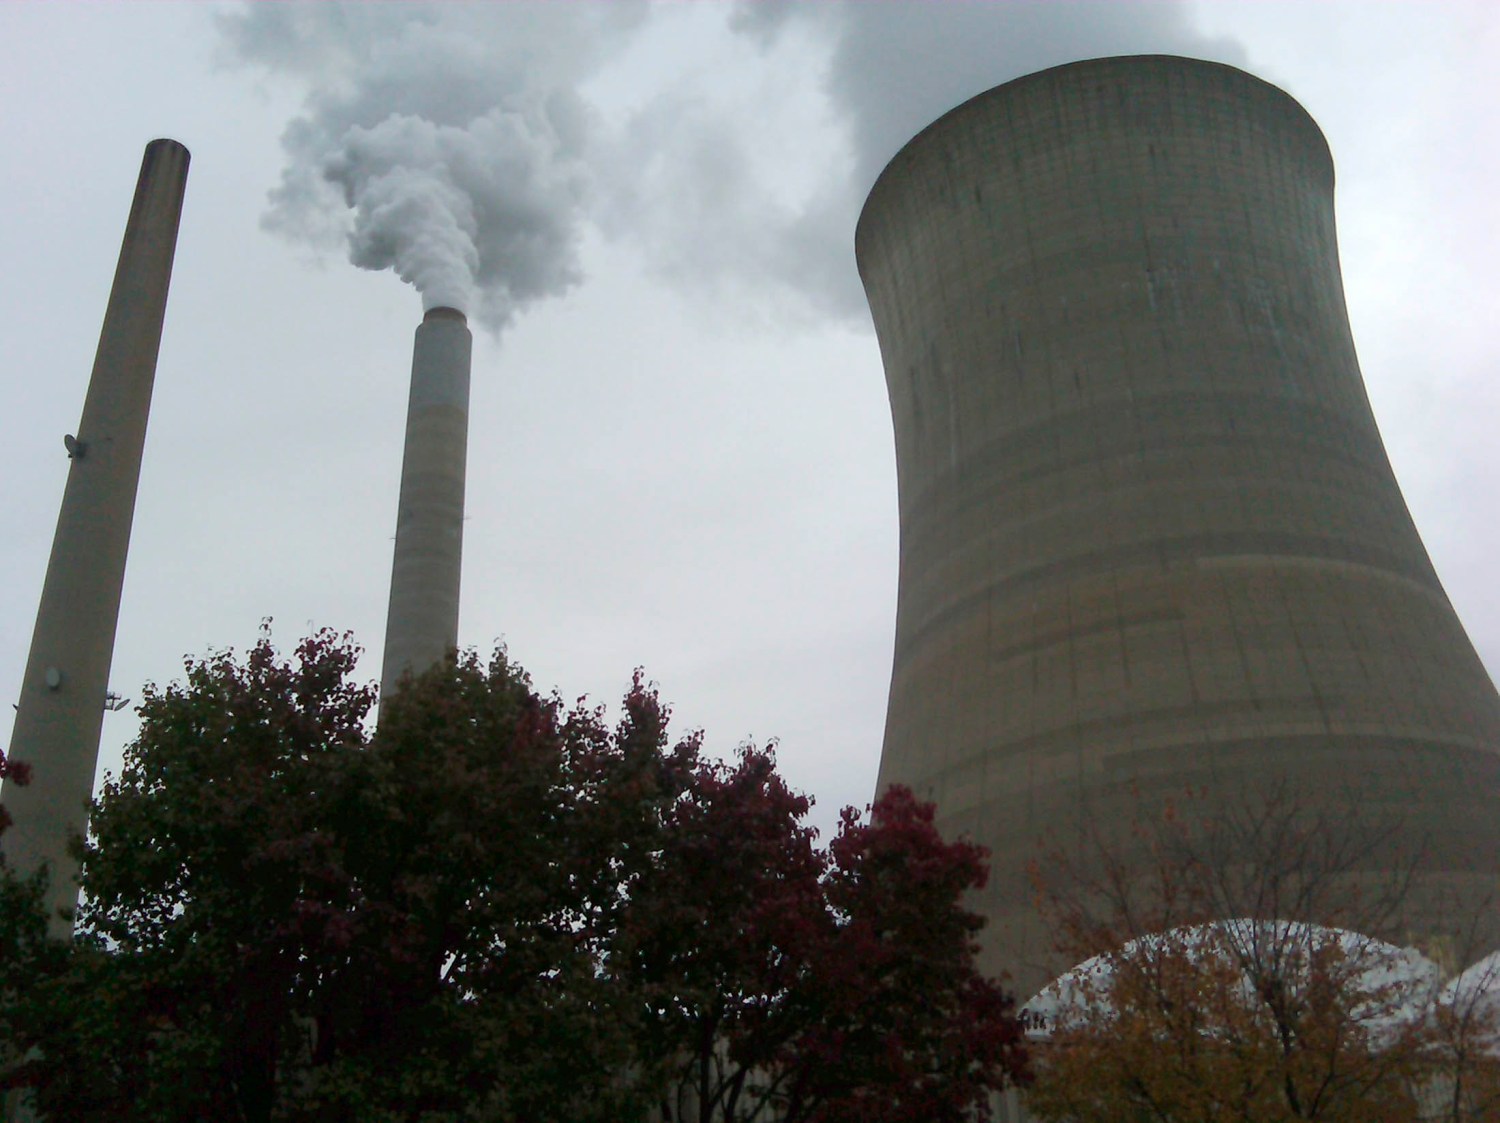 The American Electric Power Company's cooling tower at their Mountaineer plant is shown in New Haven, West Virginia October 27, 2009. A looming government clampdown on CO2 emissions is about to confront an already embattled U.S. coal power industry with two stark options: capture carbon or die. Legislation from Congress or tough new regulatory demands could make it costly to spew greenhouse gases, posing a serious threat to the nation's coal-fired power plants.  Picture taken October 27, 2009. To match feature USA-CARBON/COAL   REUTERS/Ayesha Rascoe   (UNITED STATES ENERGY POLITICS ENVIRONMENT SOCIETY BUSINESS)